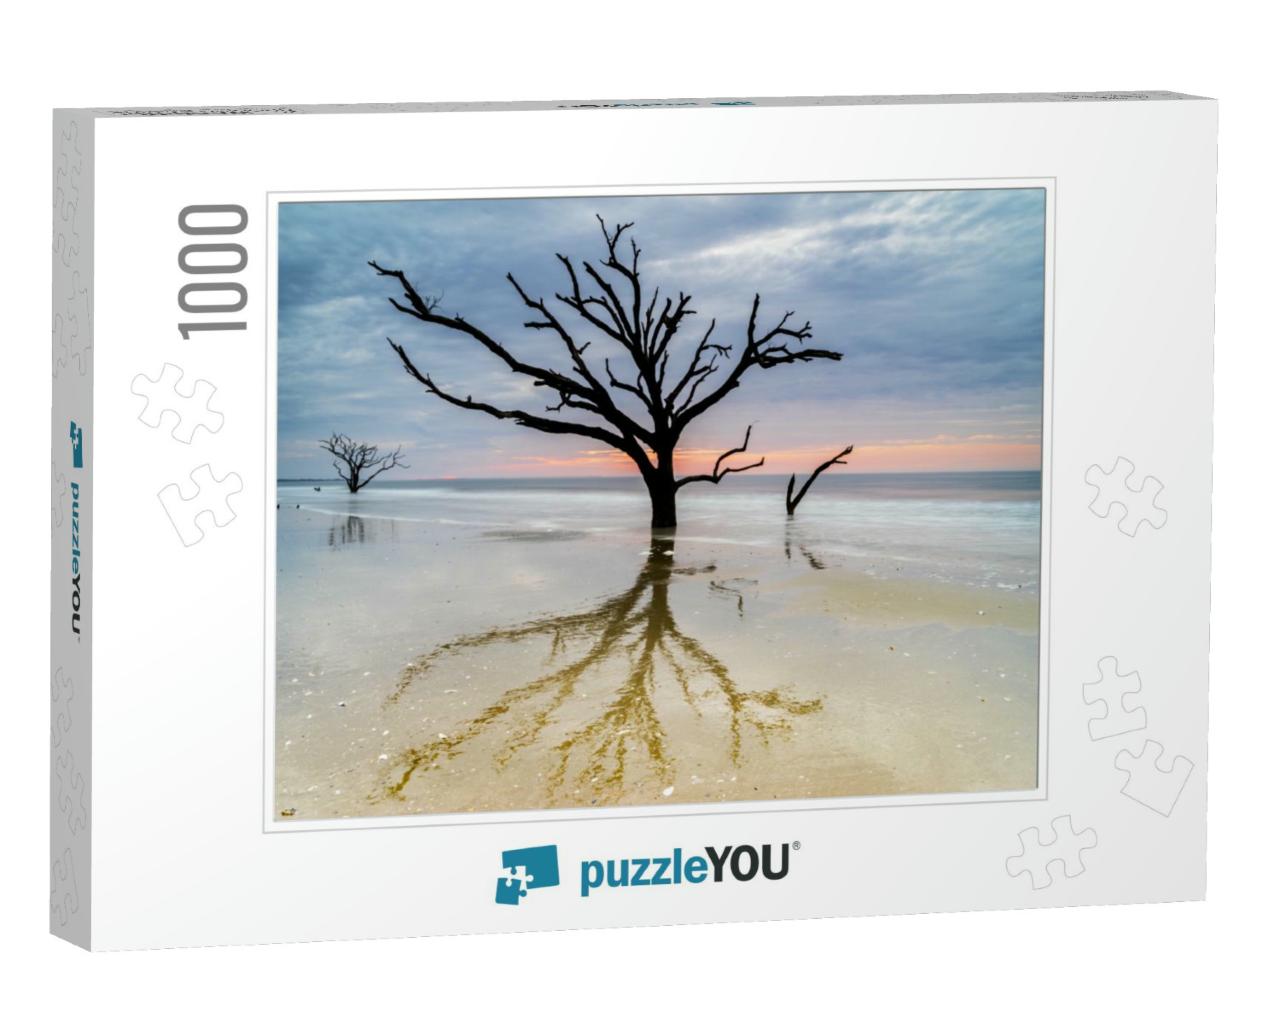 An Aged, Weathered Oak Tree Lingers on the Edisto Island... Jigsaw Puzzle with 1000 pieces